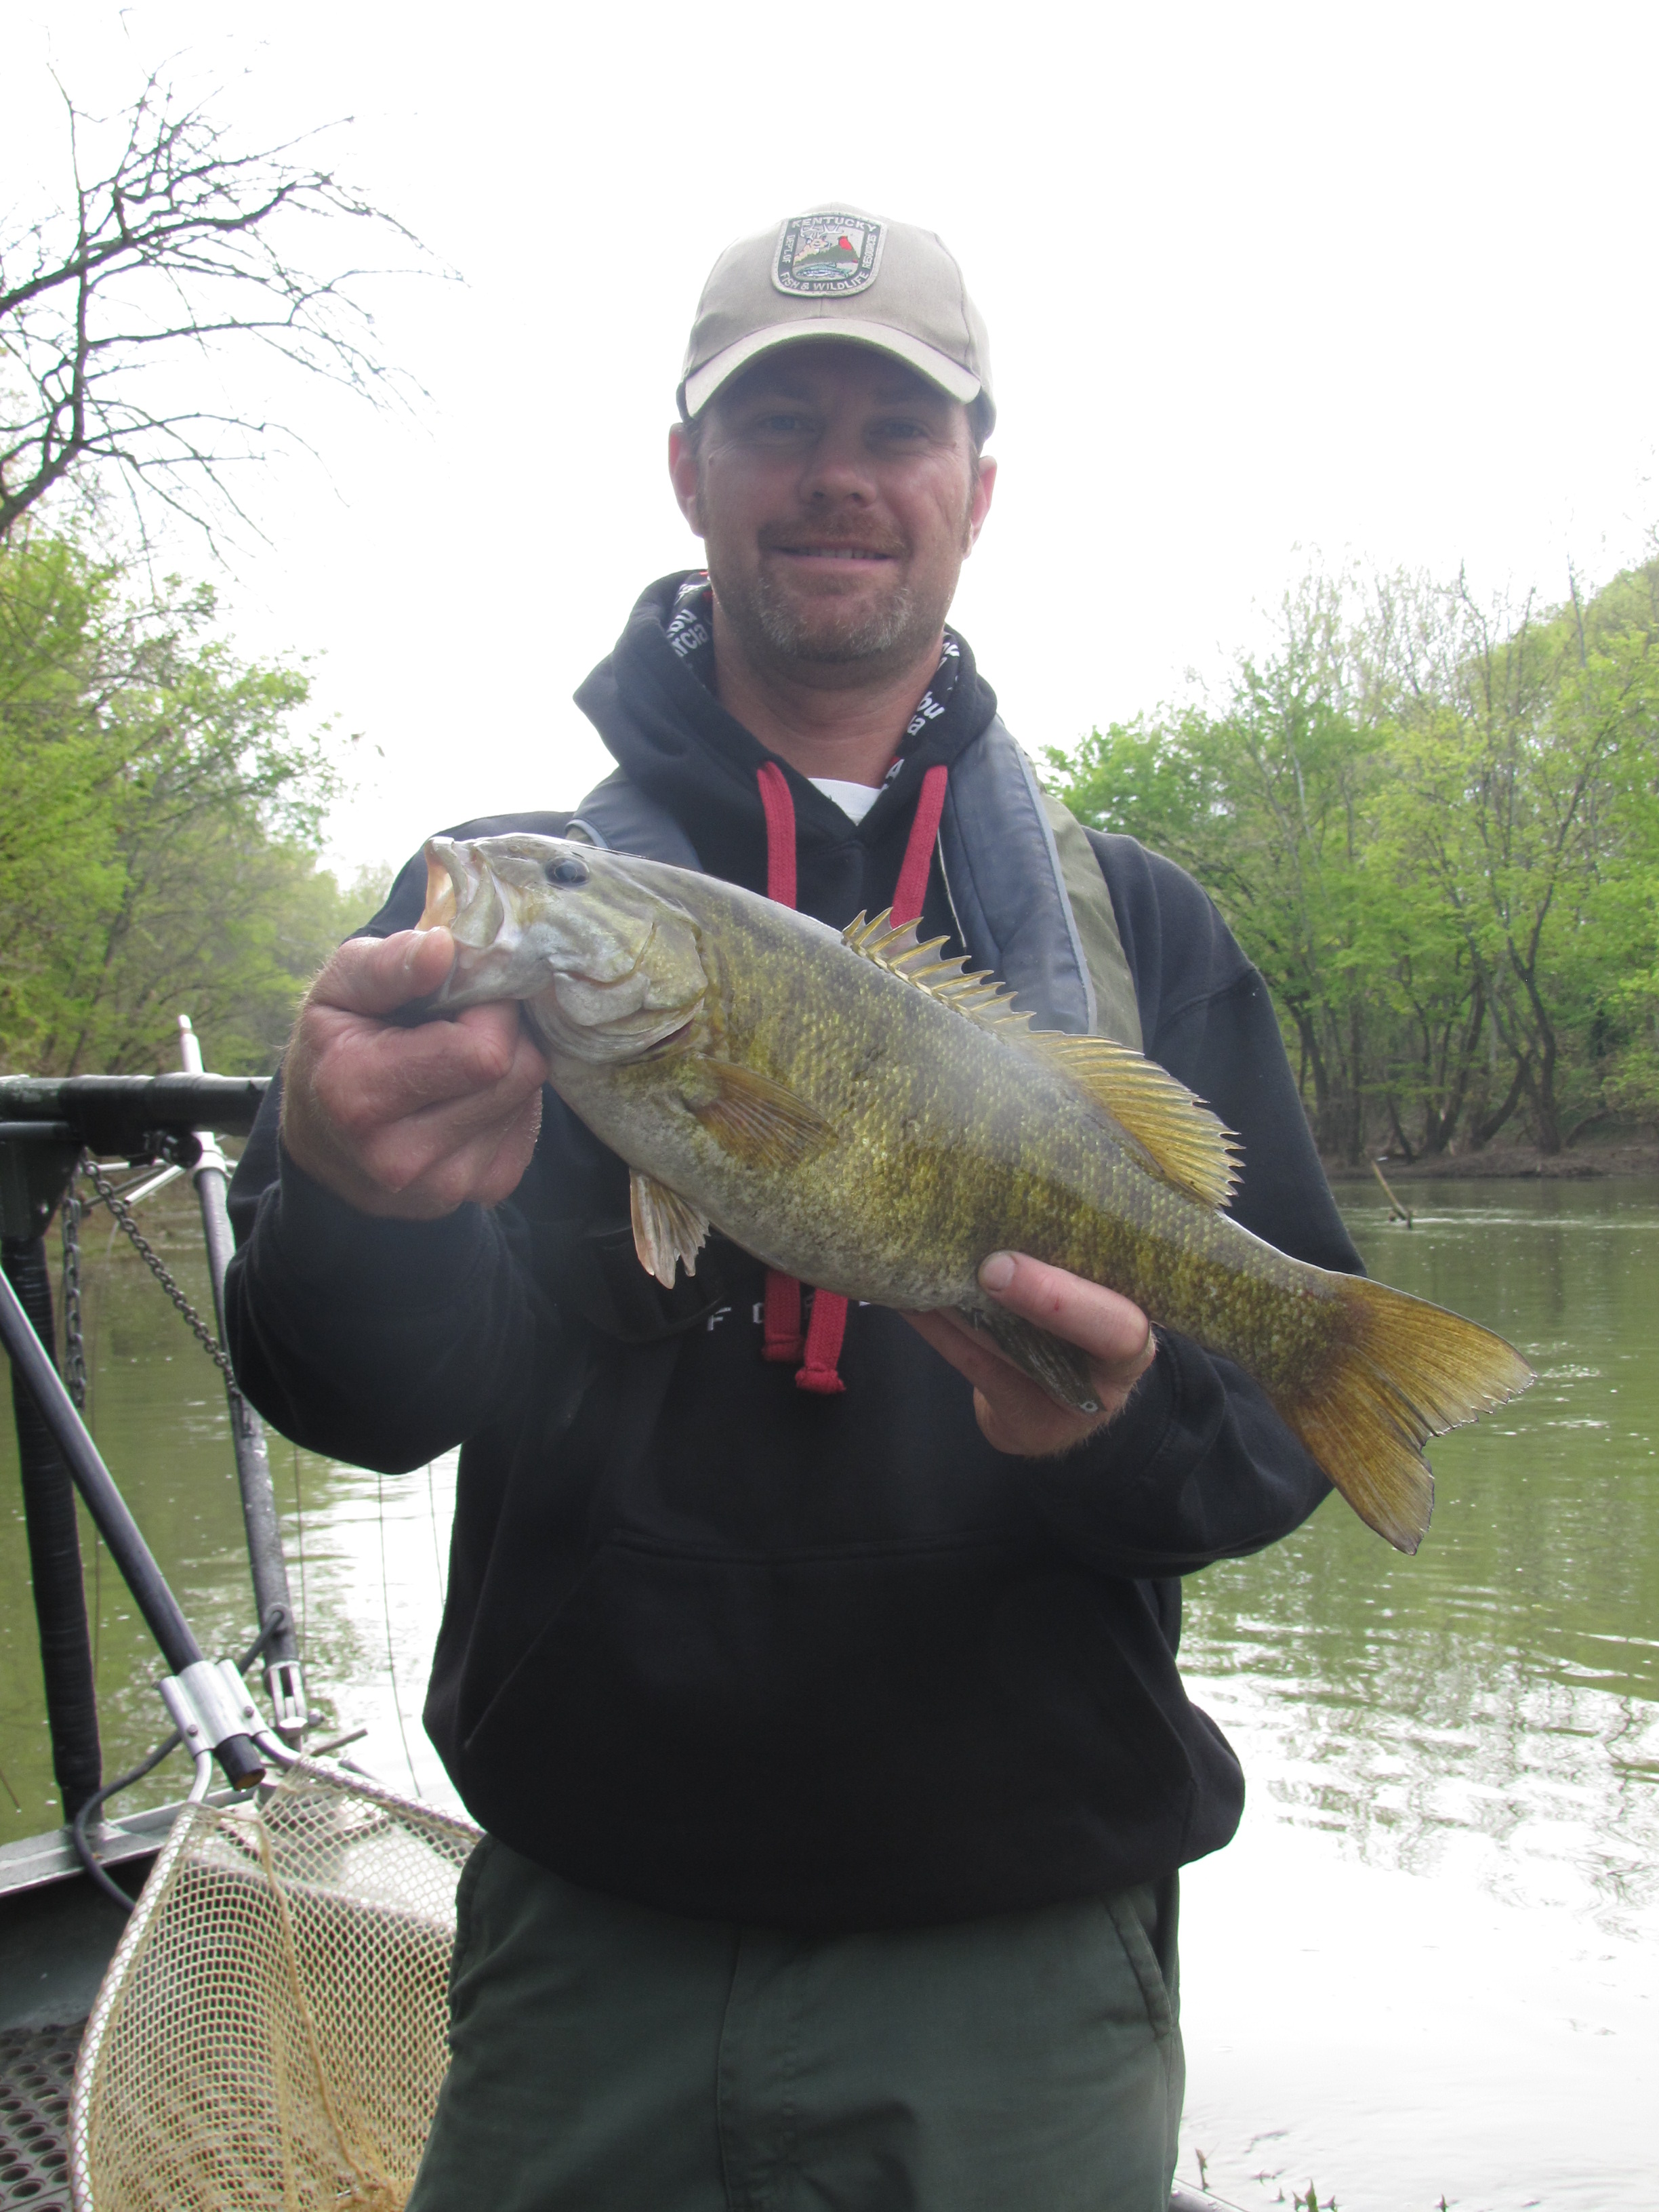 Chad Nickell, fisheries technician, holds a nice smallmouth bass collected and released from the South Fork Licking River.